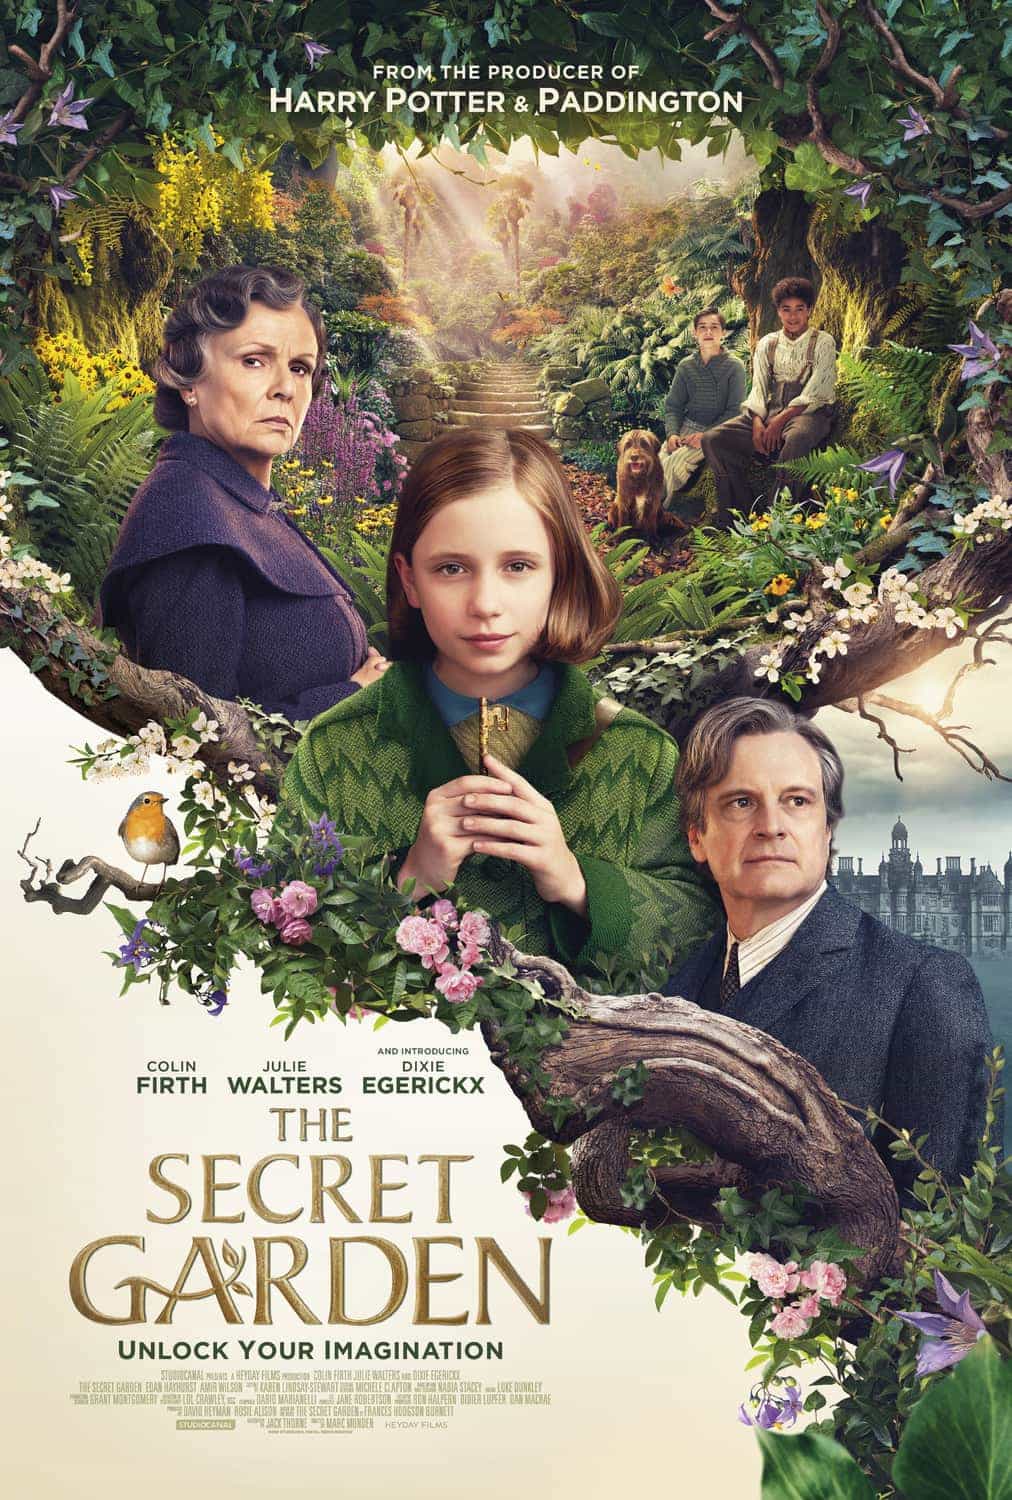 UK Box Office Weekend Report 13th - 15th November 2020:  The Secret Garden jumps to the top of the UK box office on its 4th week of release